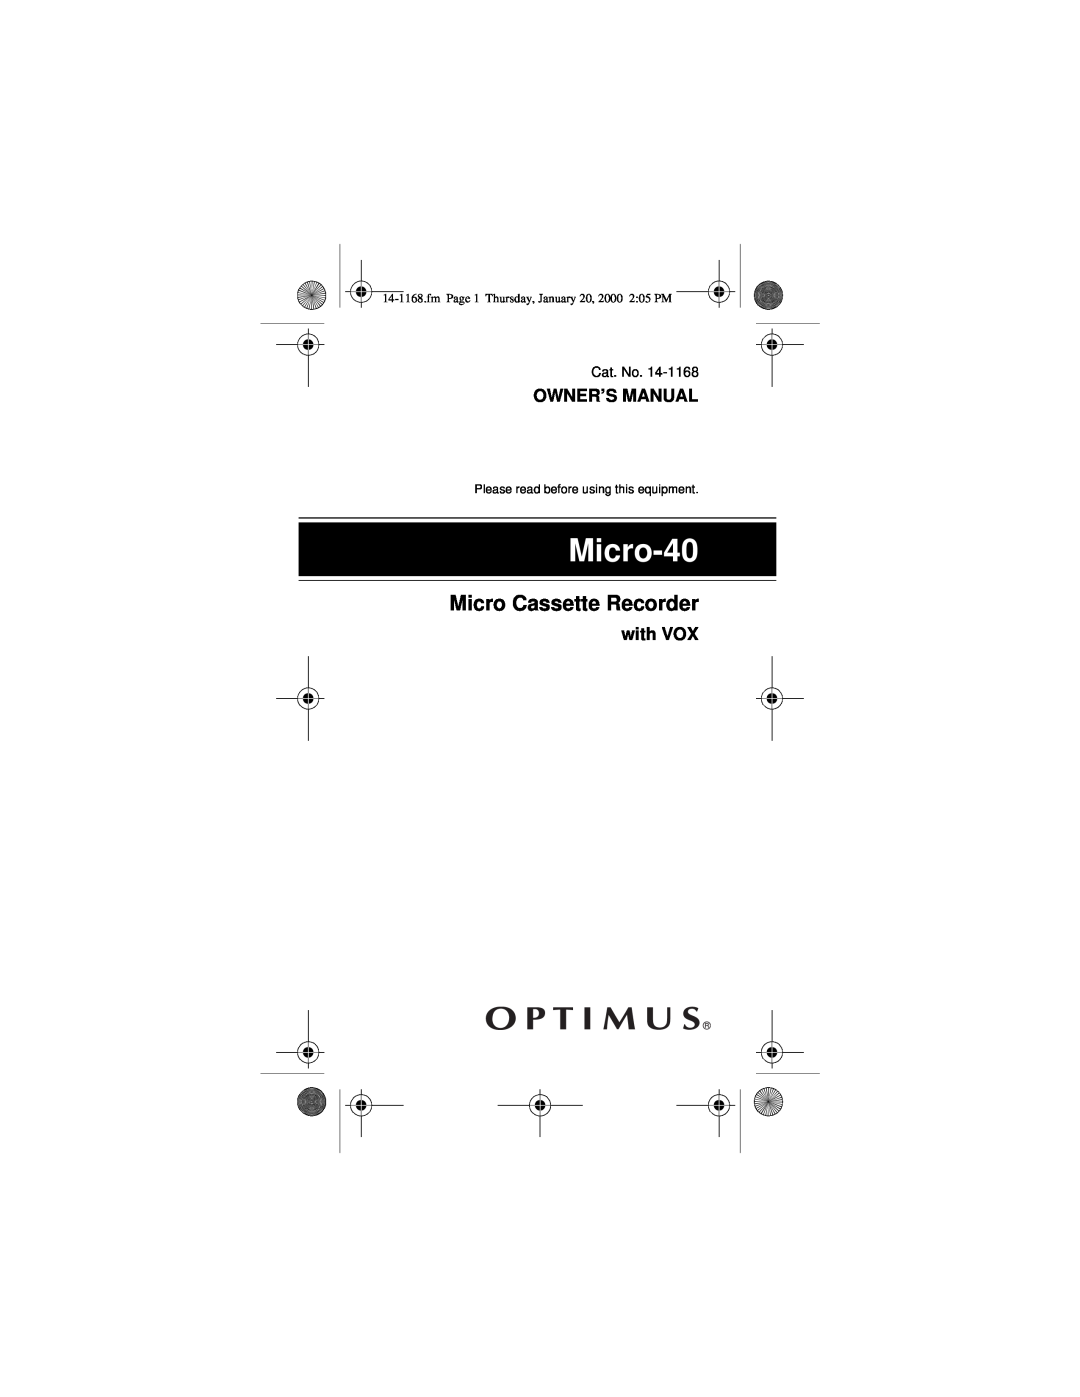 Optimus Micro-40 owner manual Micro Cassette Recorder, with VOX, Cat. No, fm Page 1 Thursday, January 20, 2000 205 PM 